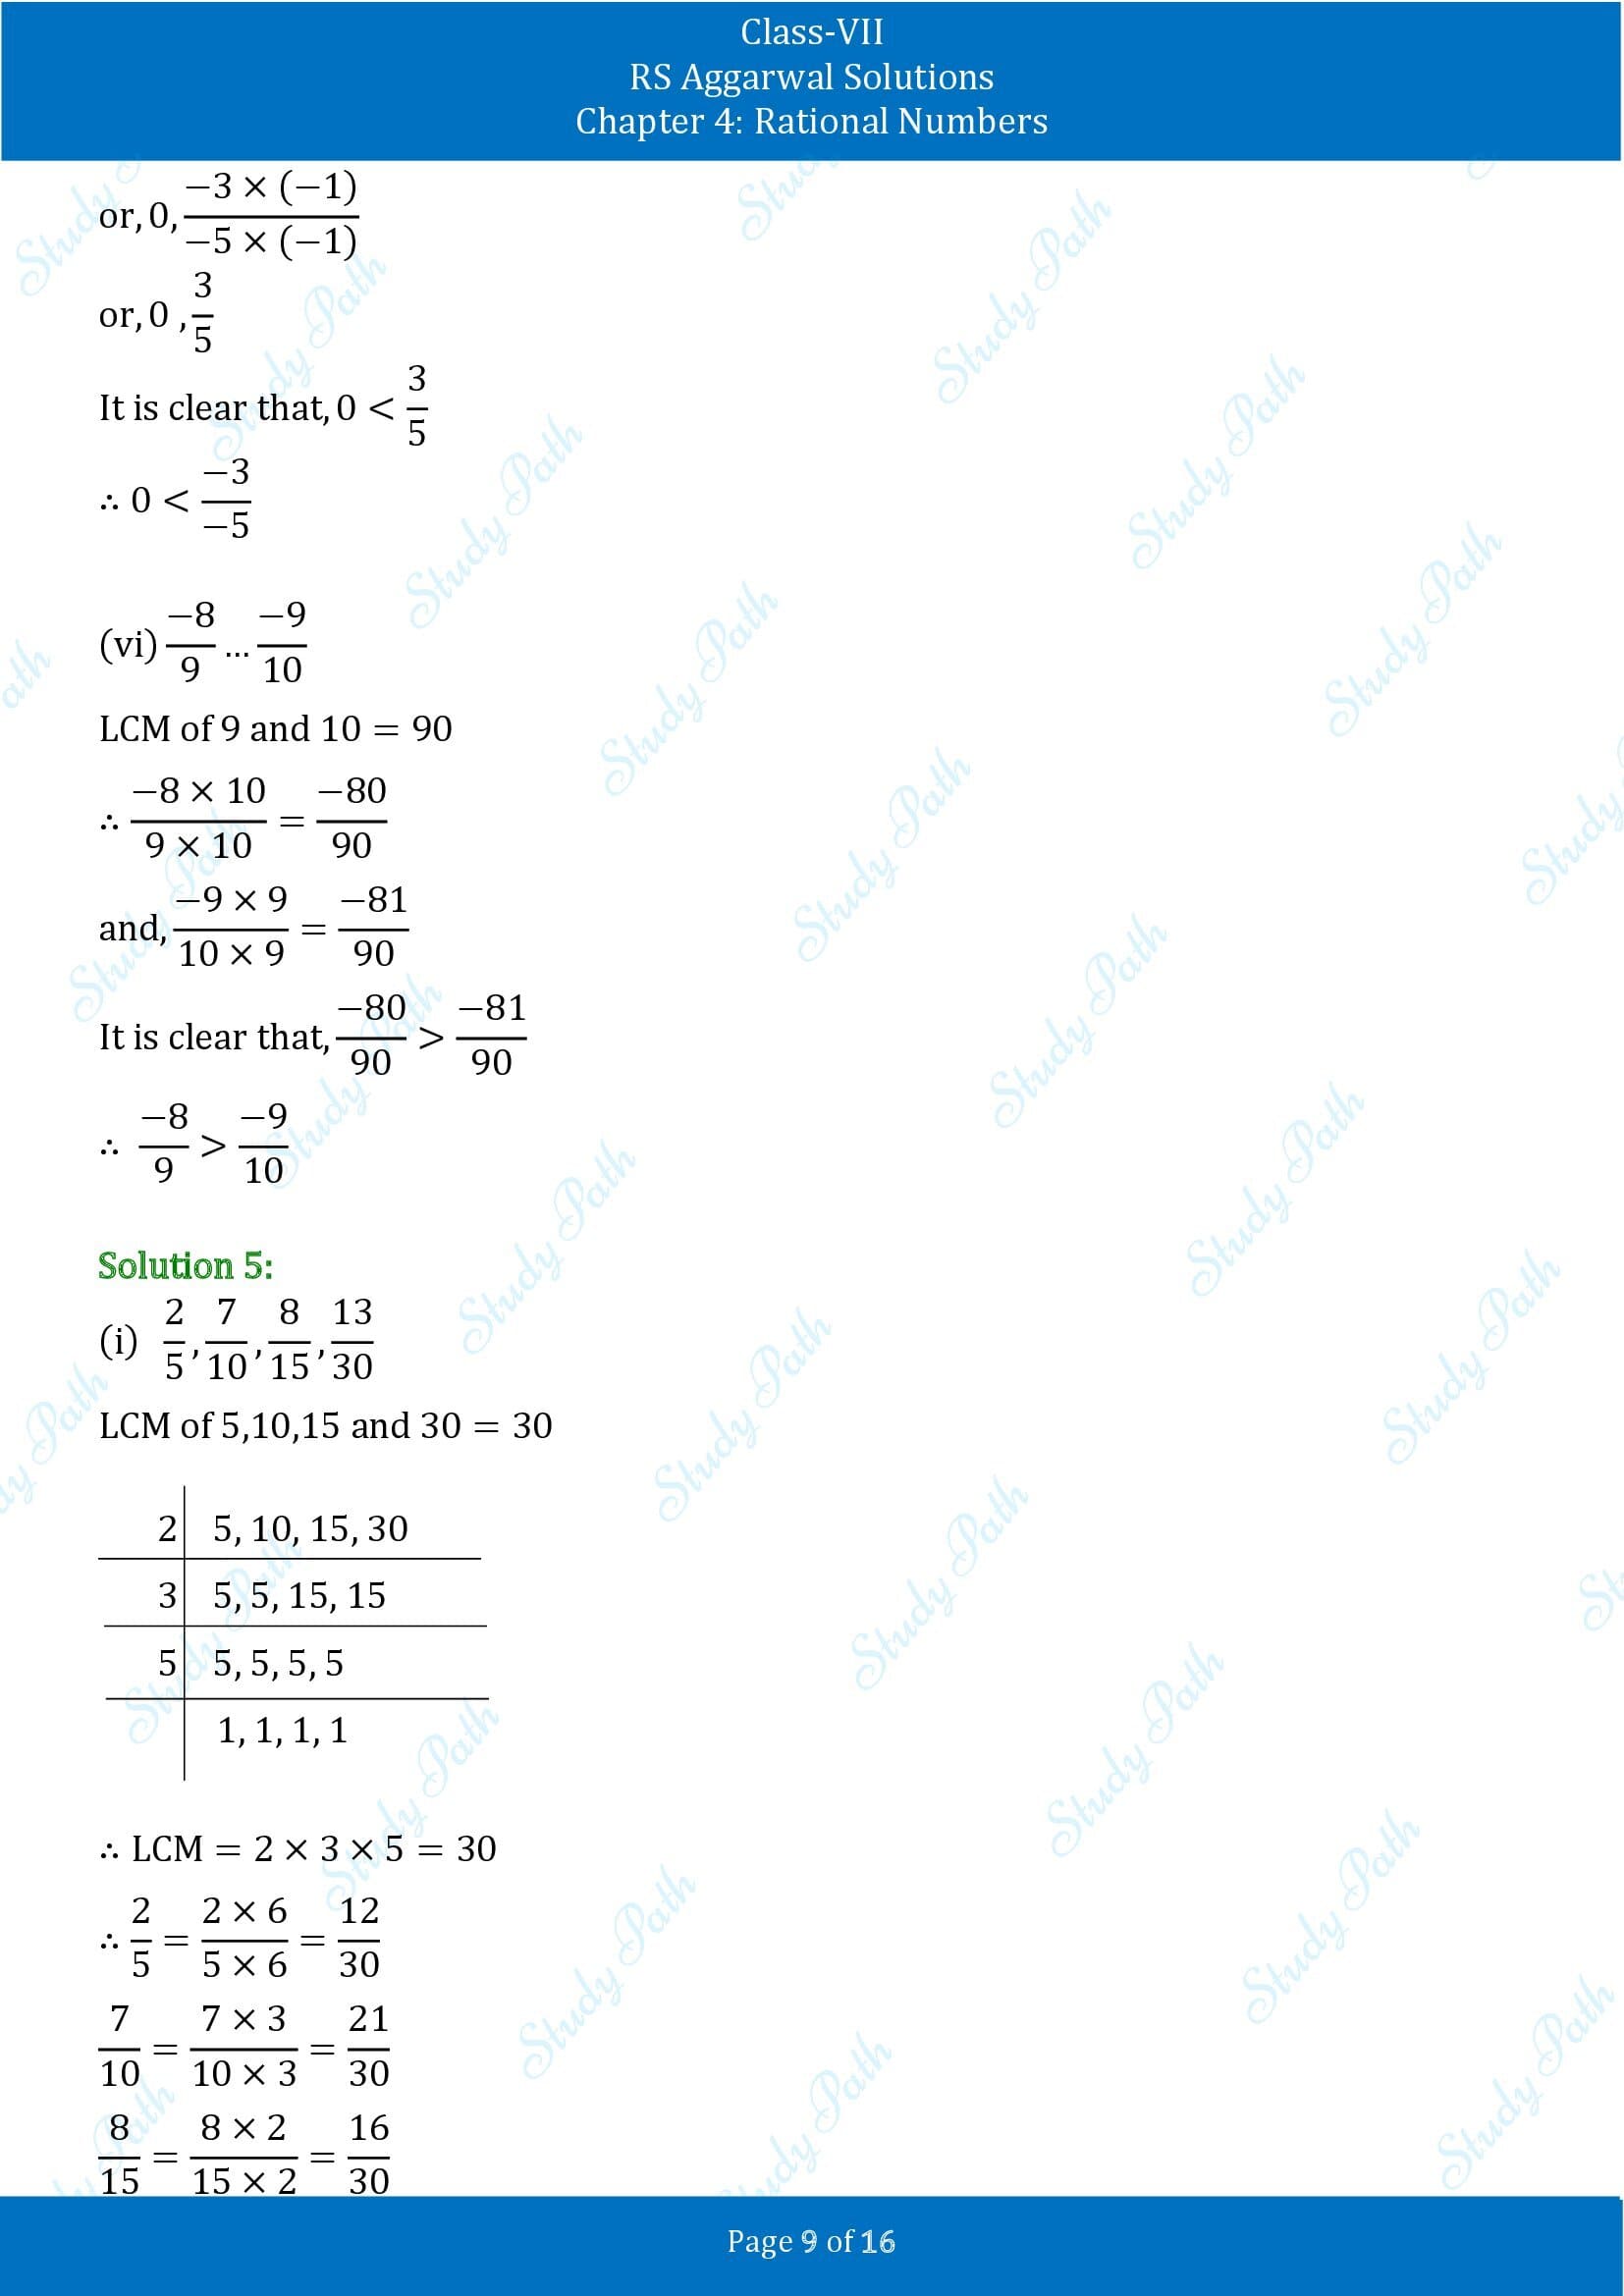 RS Aggarwal Solutions Class 7 Chapter 4 Rational Numbers Exercise 4B 00009